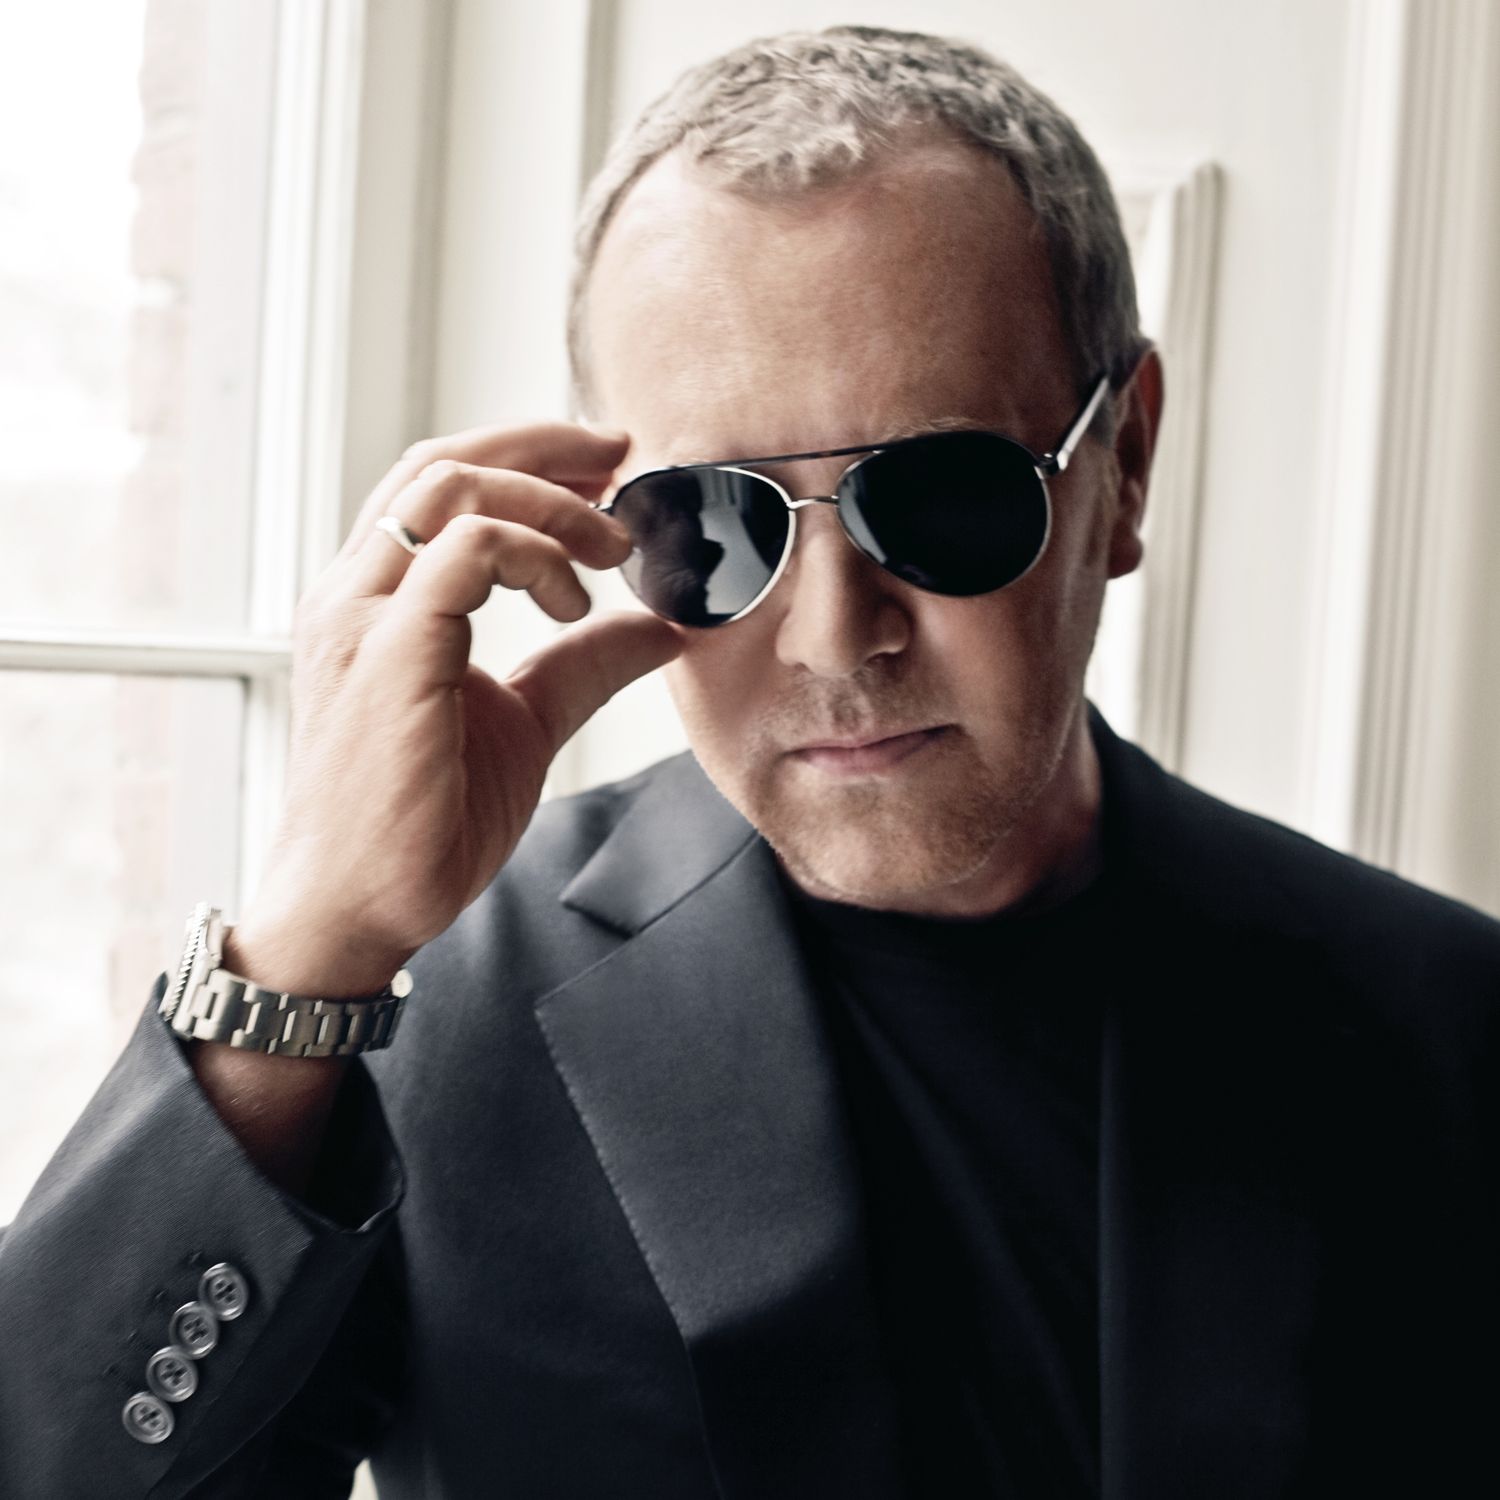 Michael Kors Interview - Michael On His Career As Fashion